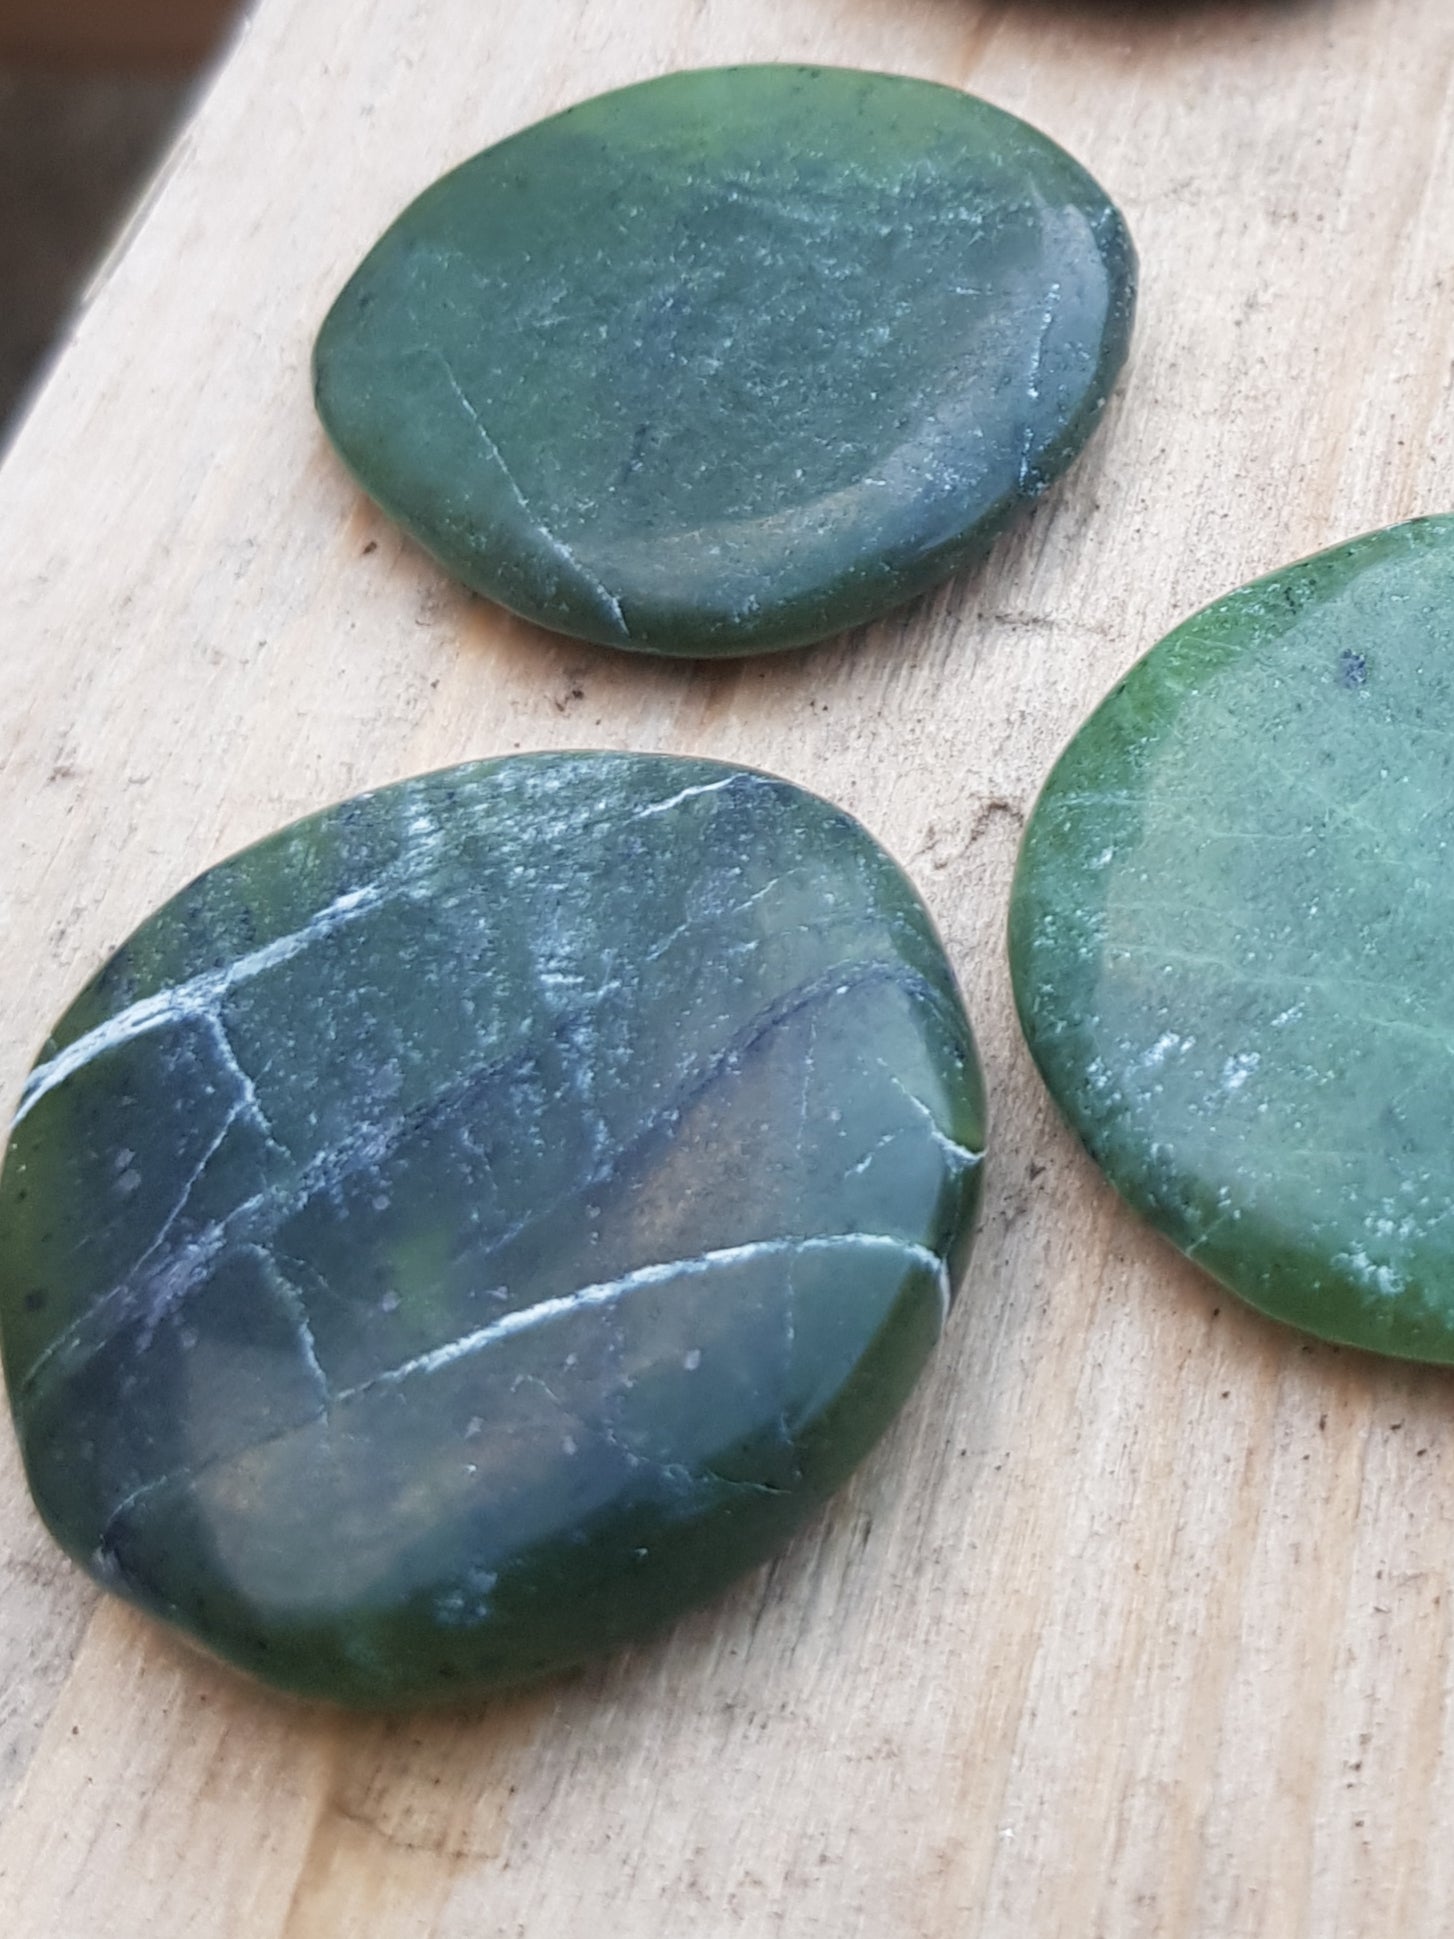 nephrite jade palmstone. dark green with some white lineations.